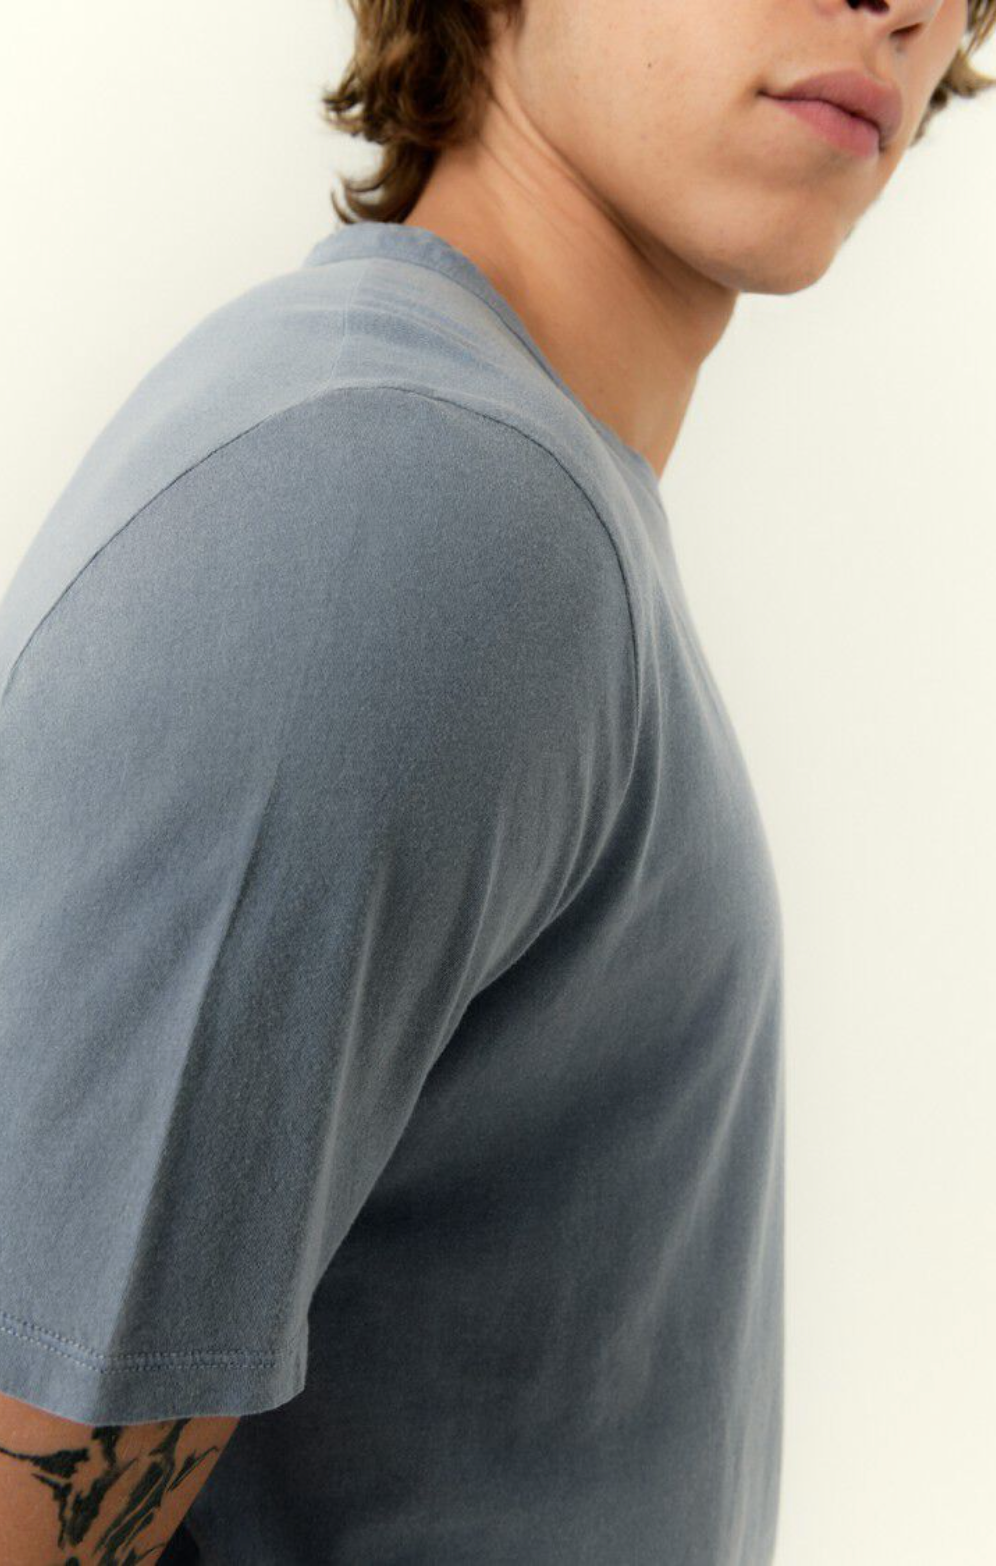 A close up shoulder detail image of a male model wearing the devon tee shirt in vintage blue with white denim 